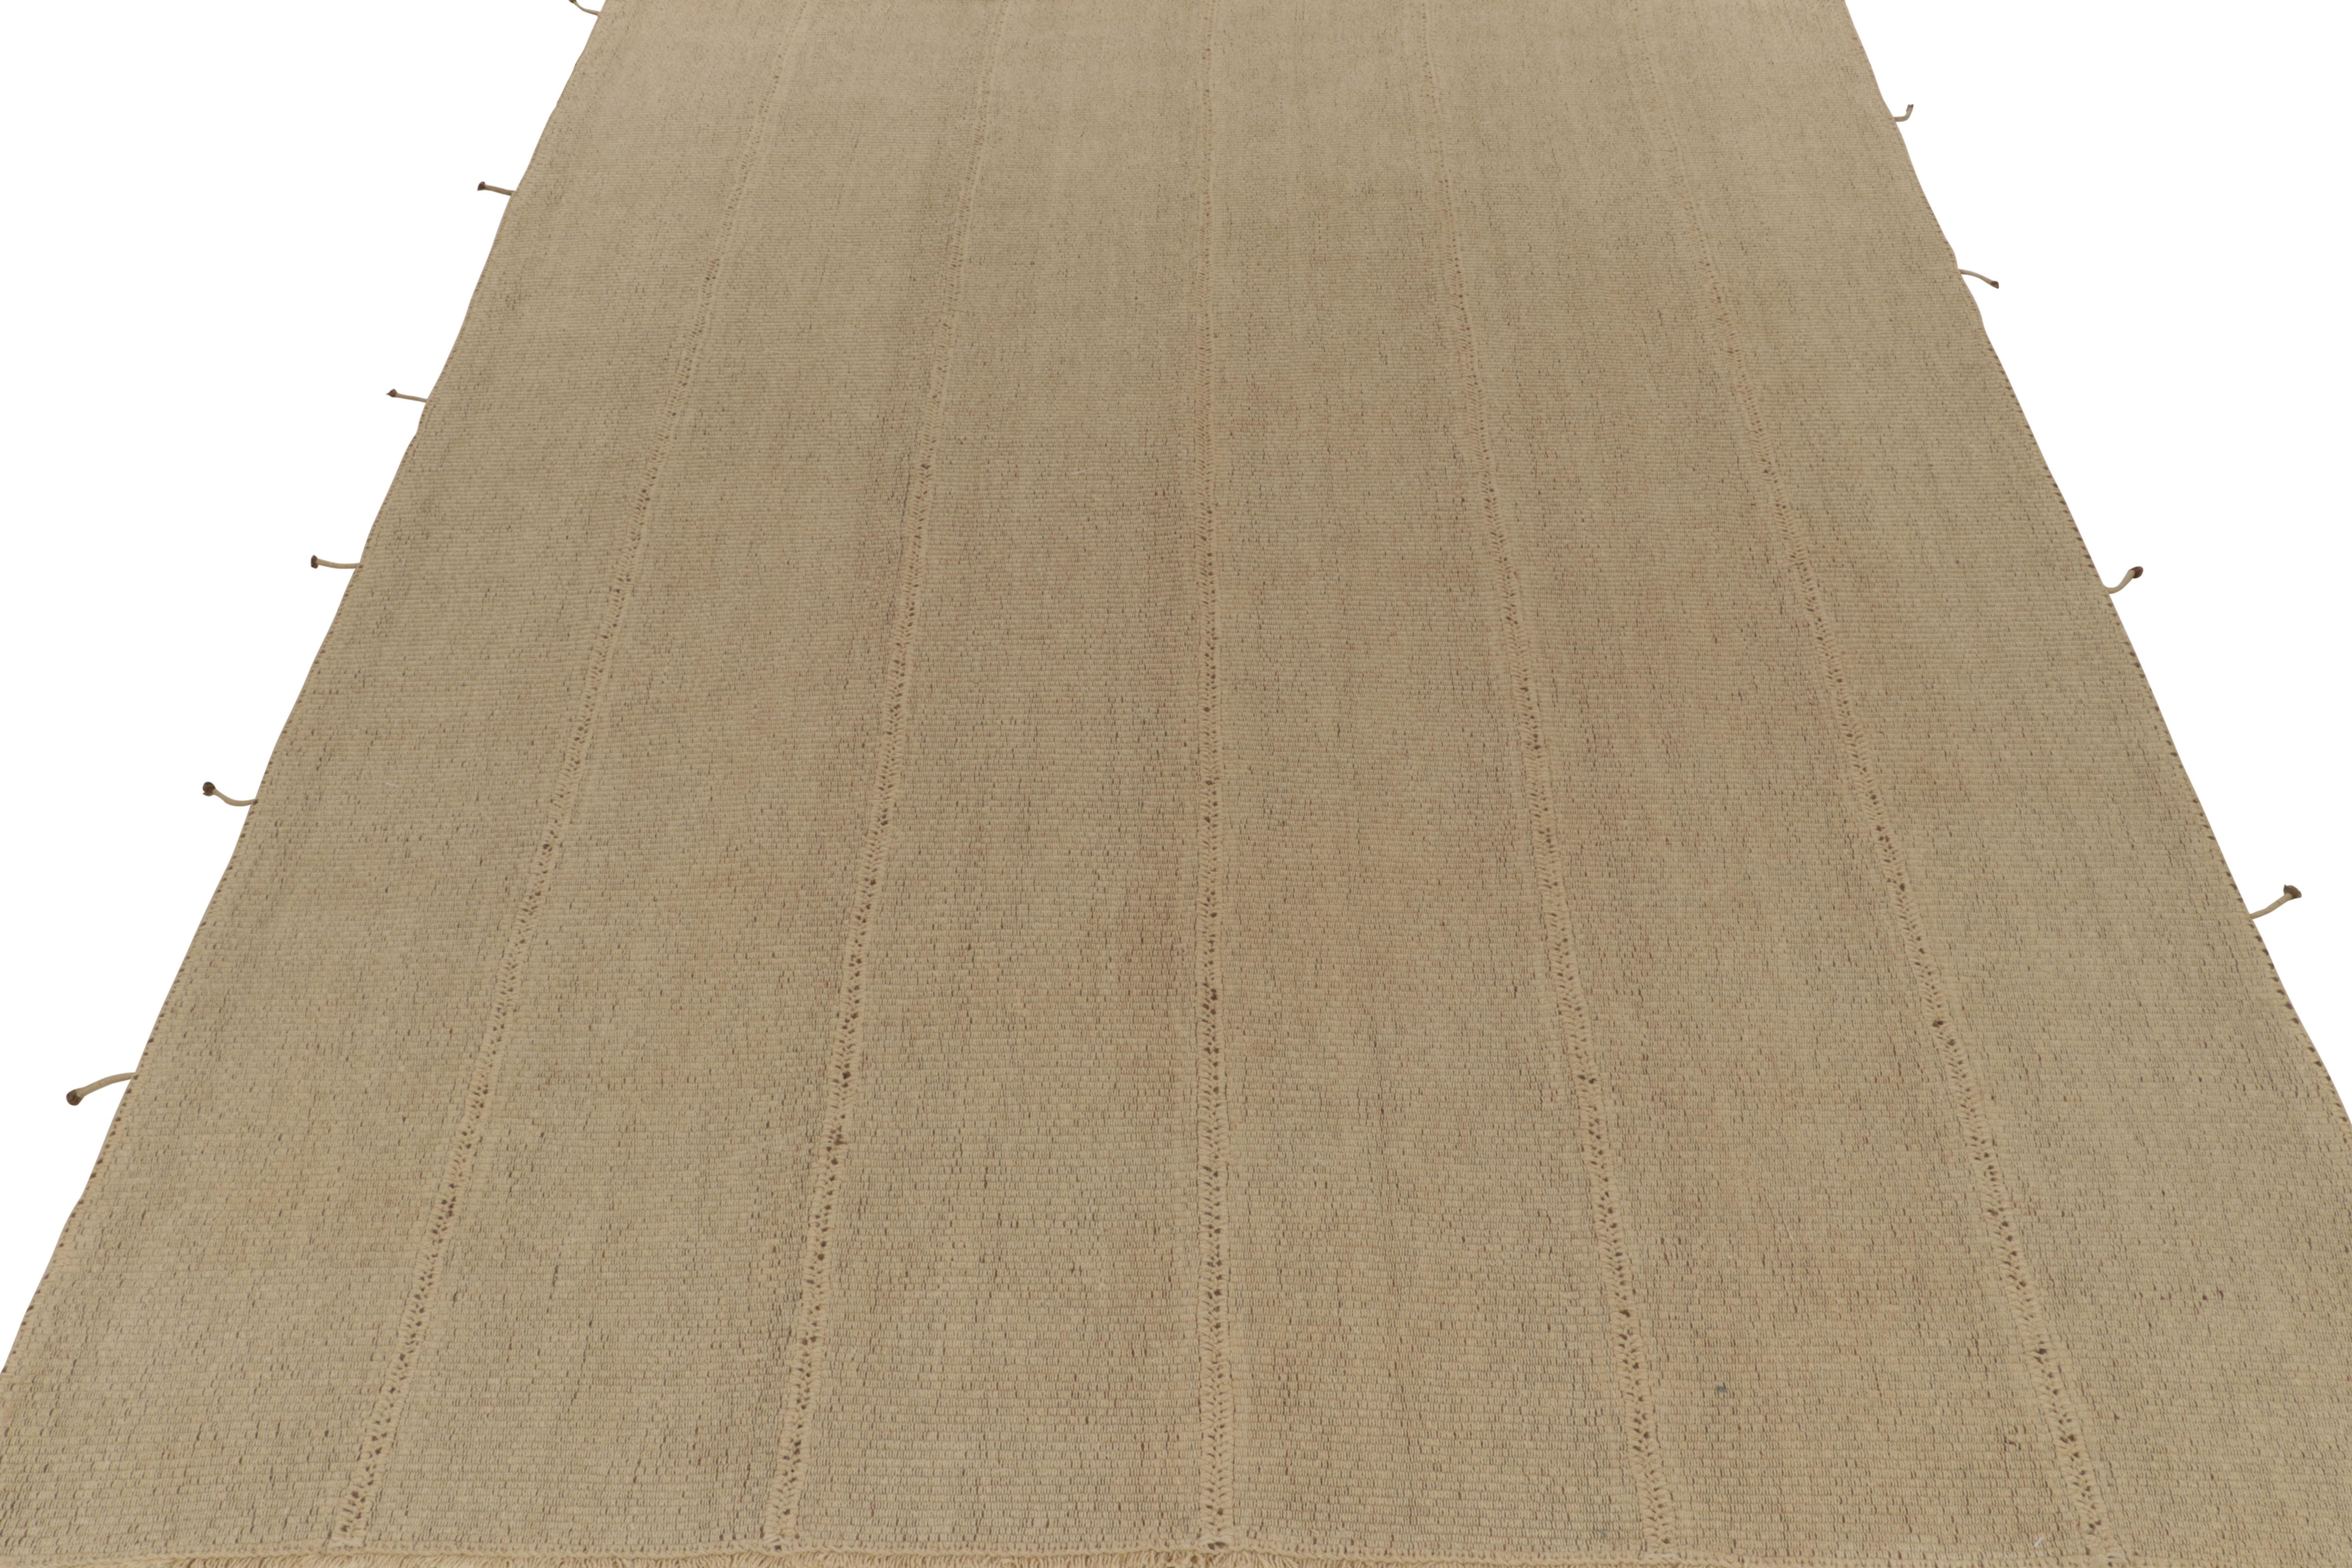 Afghan Rug & Kilim’s Contemporary Kilim in Solid, Sandy Beige-Brown Panel Woven Style For Sale